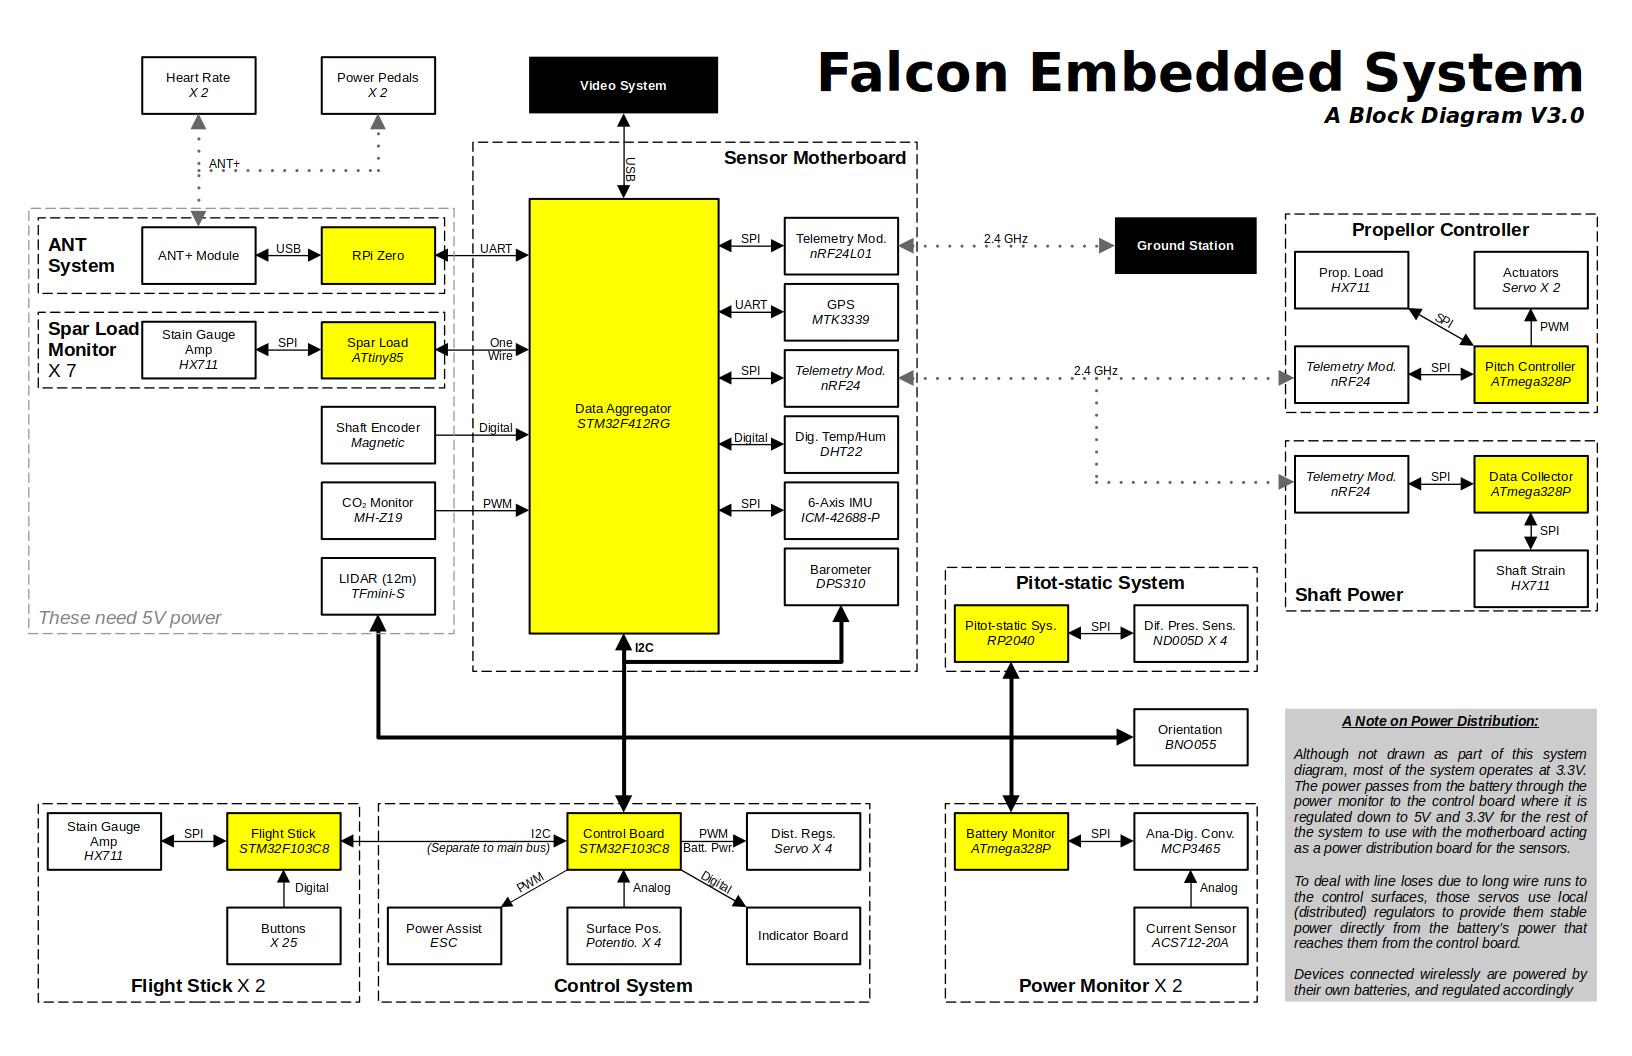 Block diagram of the entire embedded system (PDF)